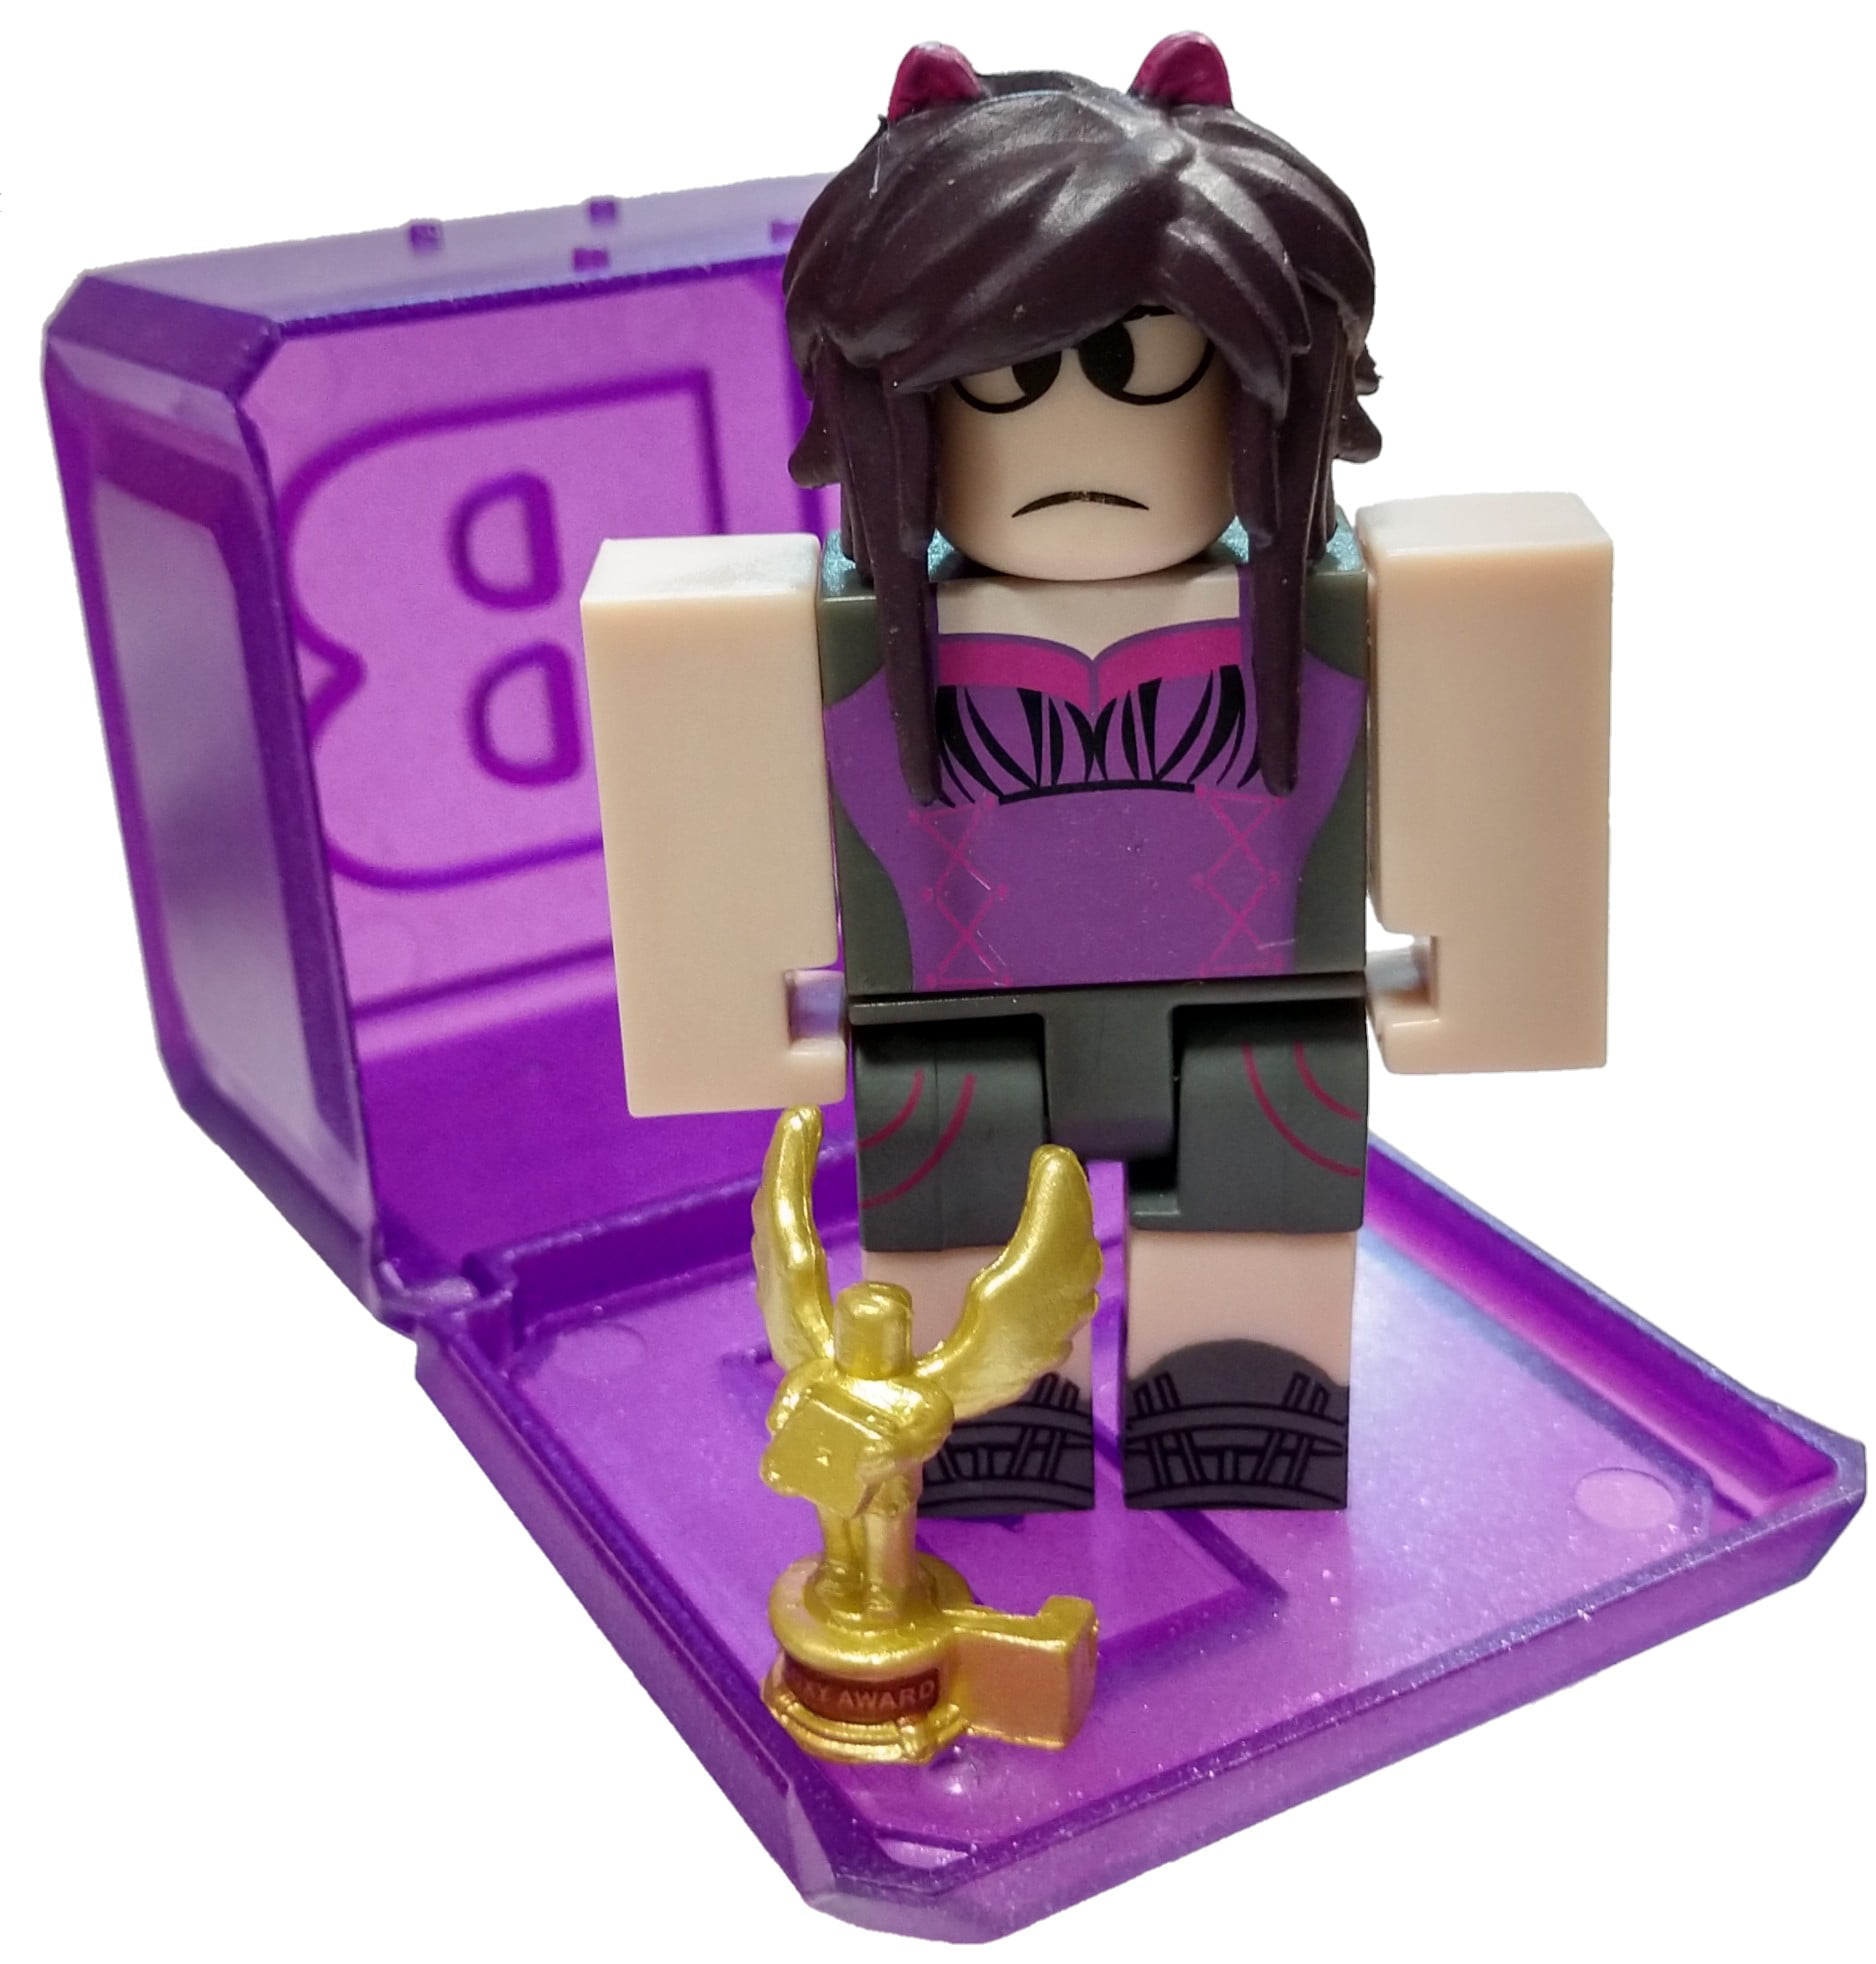 roblox celebrity collection series 3 10 million robux man 3 mini figure with cube and online code loose jazwares toywiz